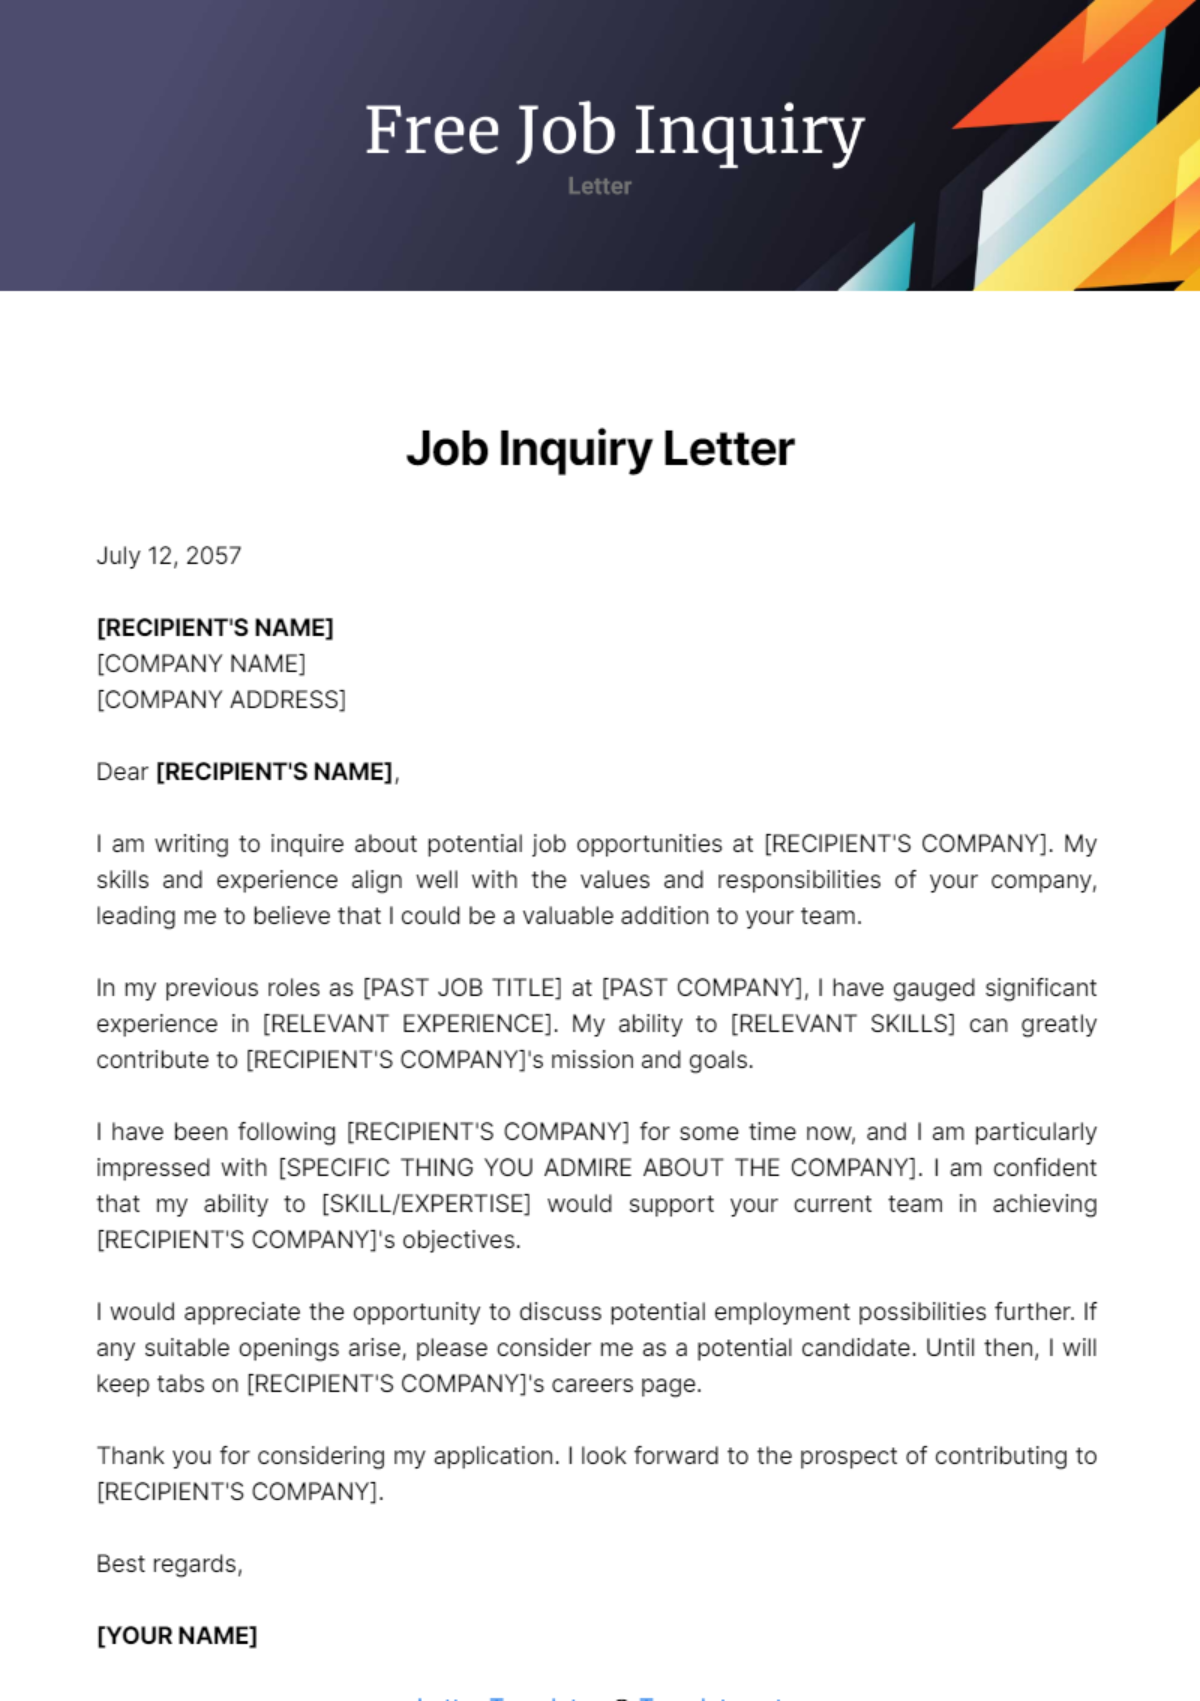 Job Inquiry Letter Template